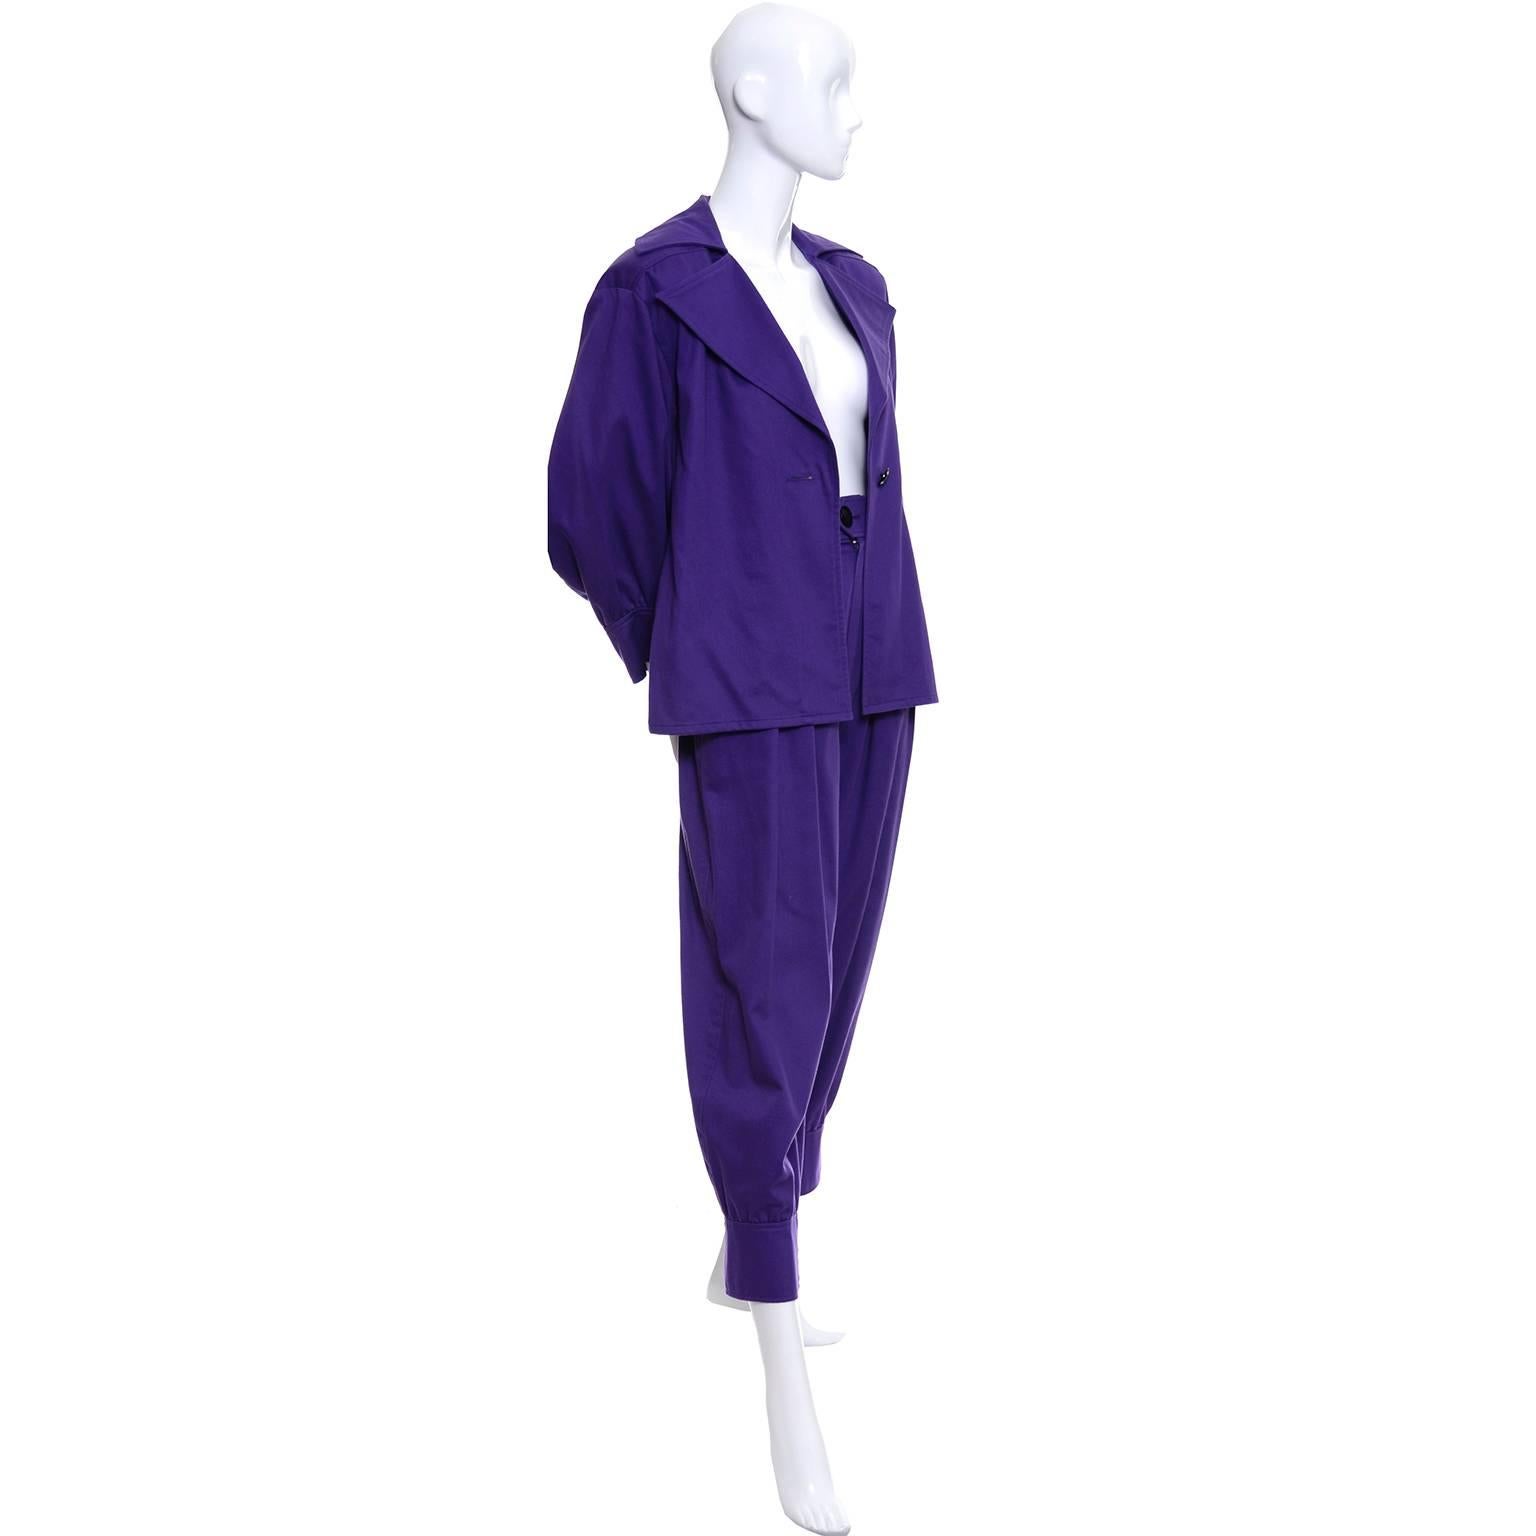 This is a fabulous purple cotton 2 piece vintage outfit from YSL with a slightly off shoulder dramatic peasant sleeves jacket/top, and a pair of knicker style pants.  The pants have side slit pockets and close with a front zipper, and the jacket has